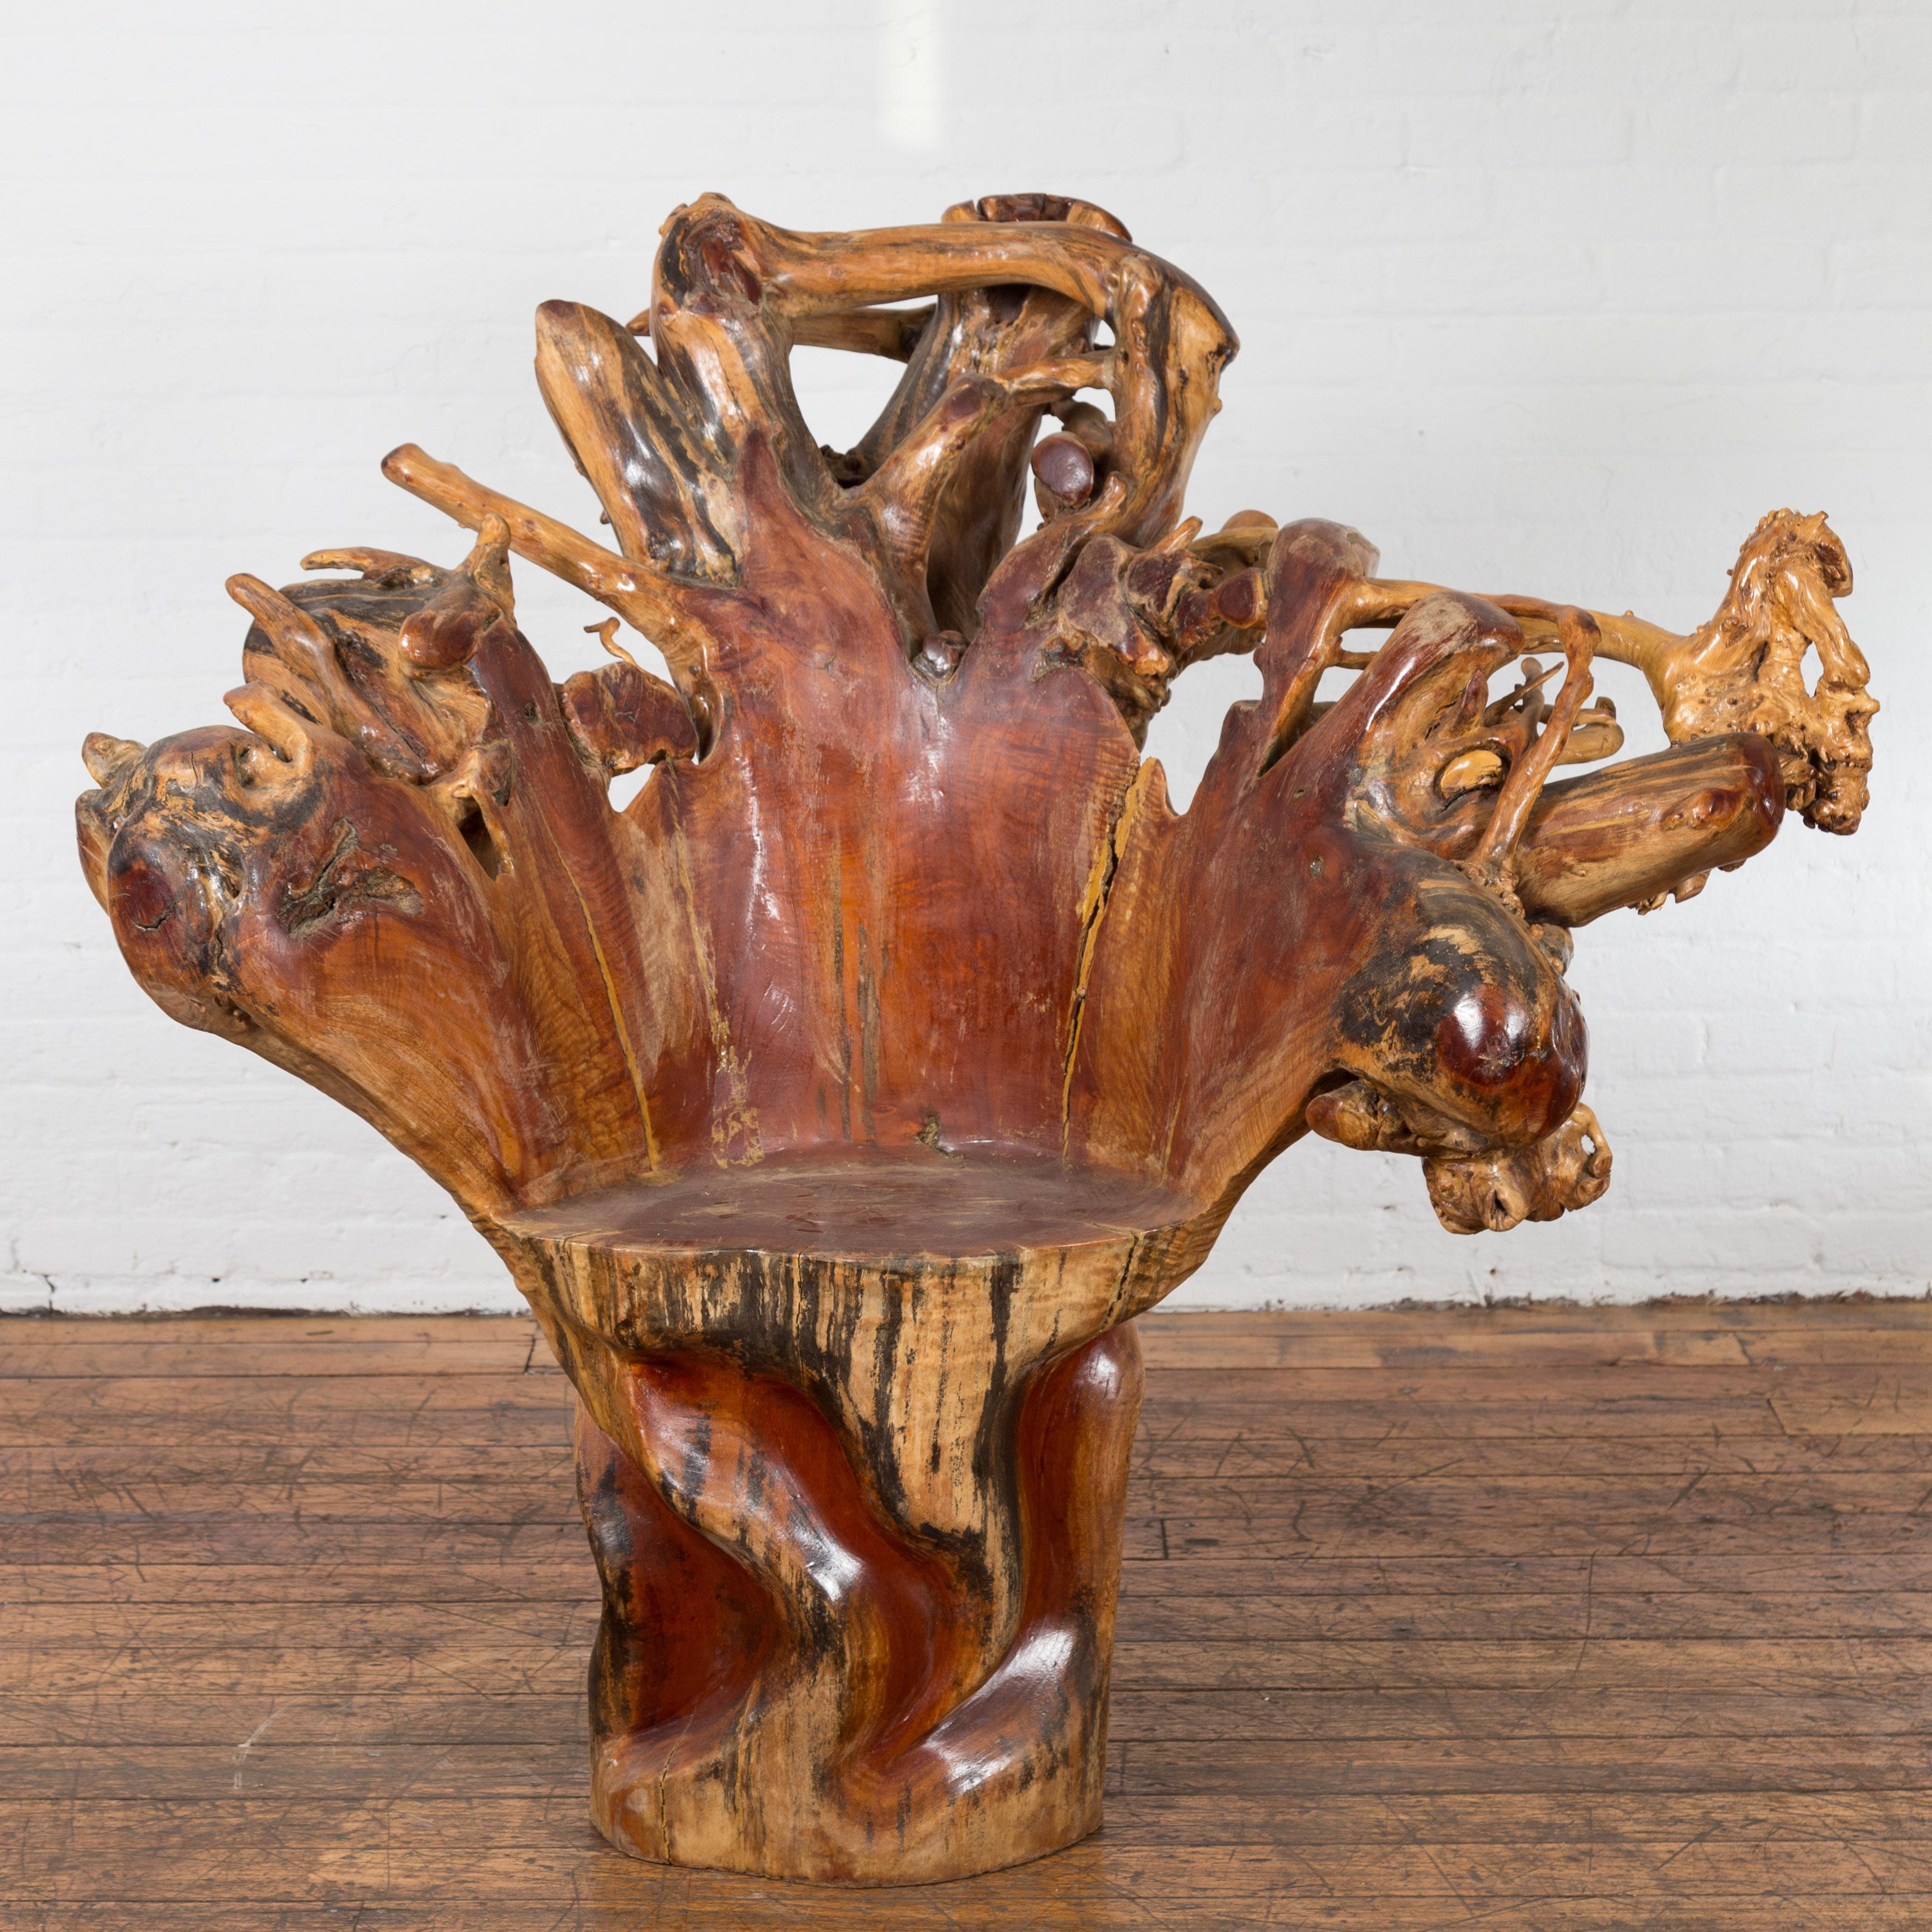 A vintage Chinese hand-crafted camphor wood root chair from the 20th century, with light varnished patina and unusual shape. This vintage Chinese hand-crafted camphor wood root chair from the 20th century is a captivating piece of functional art